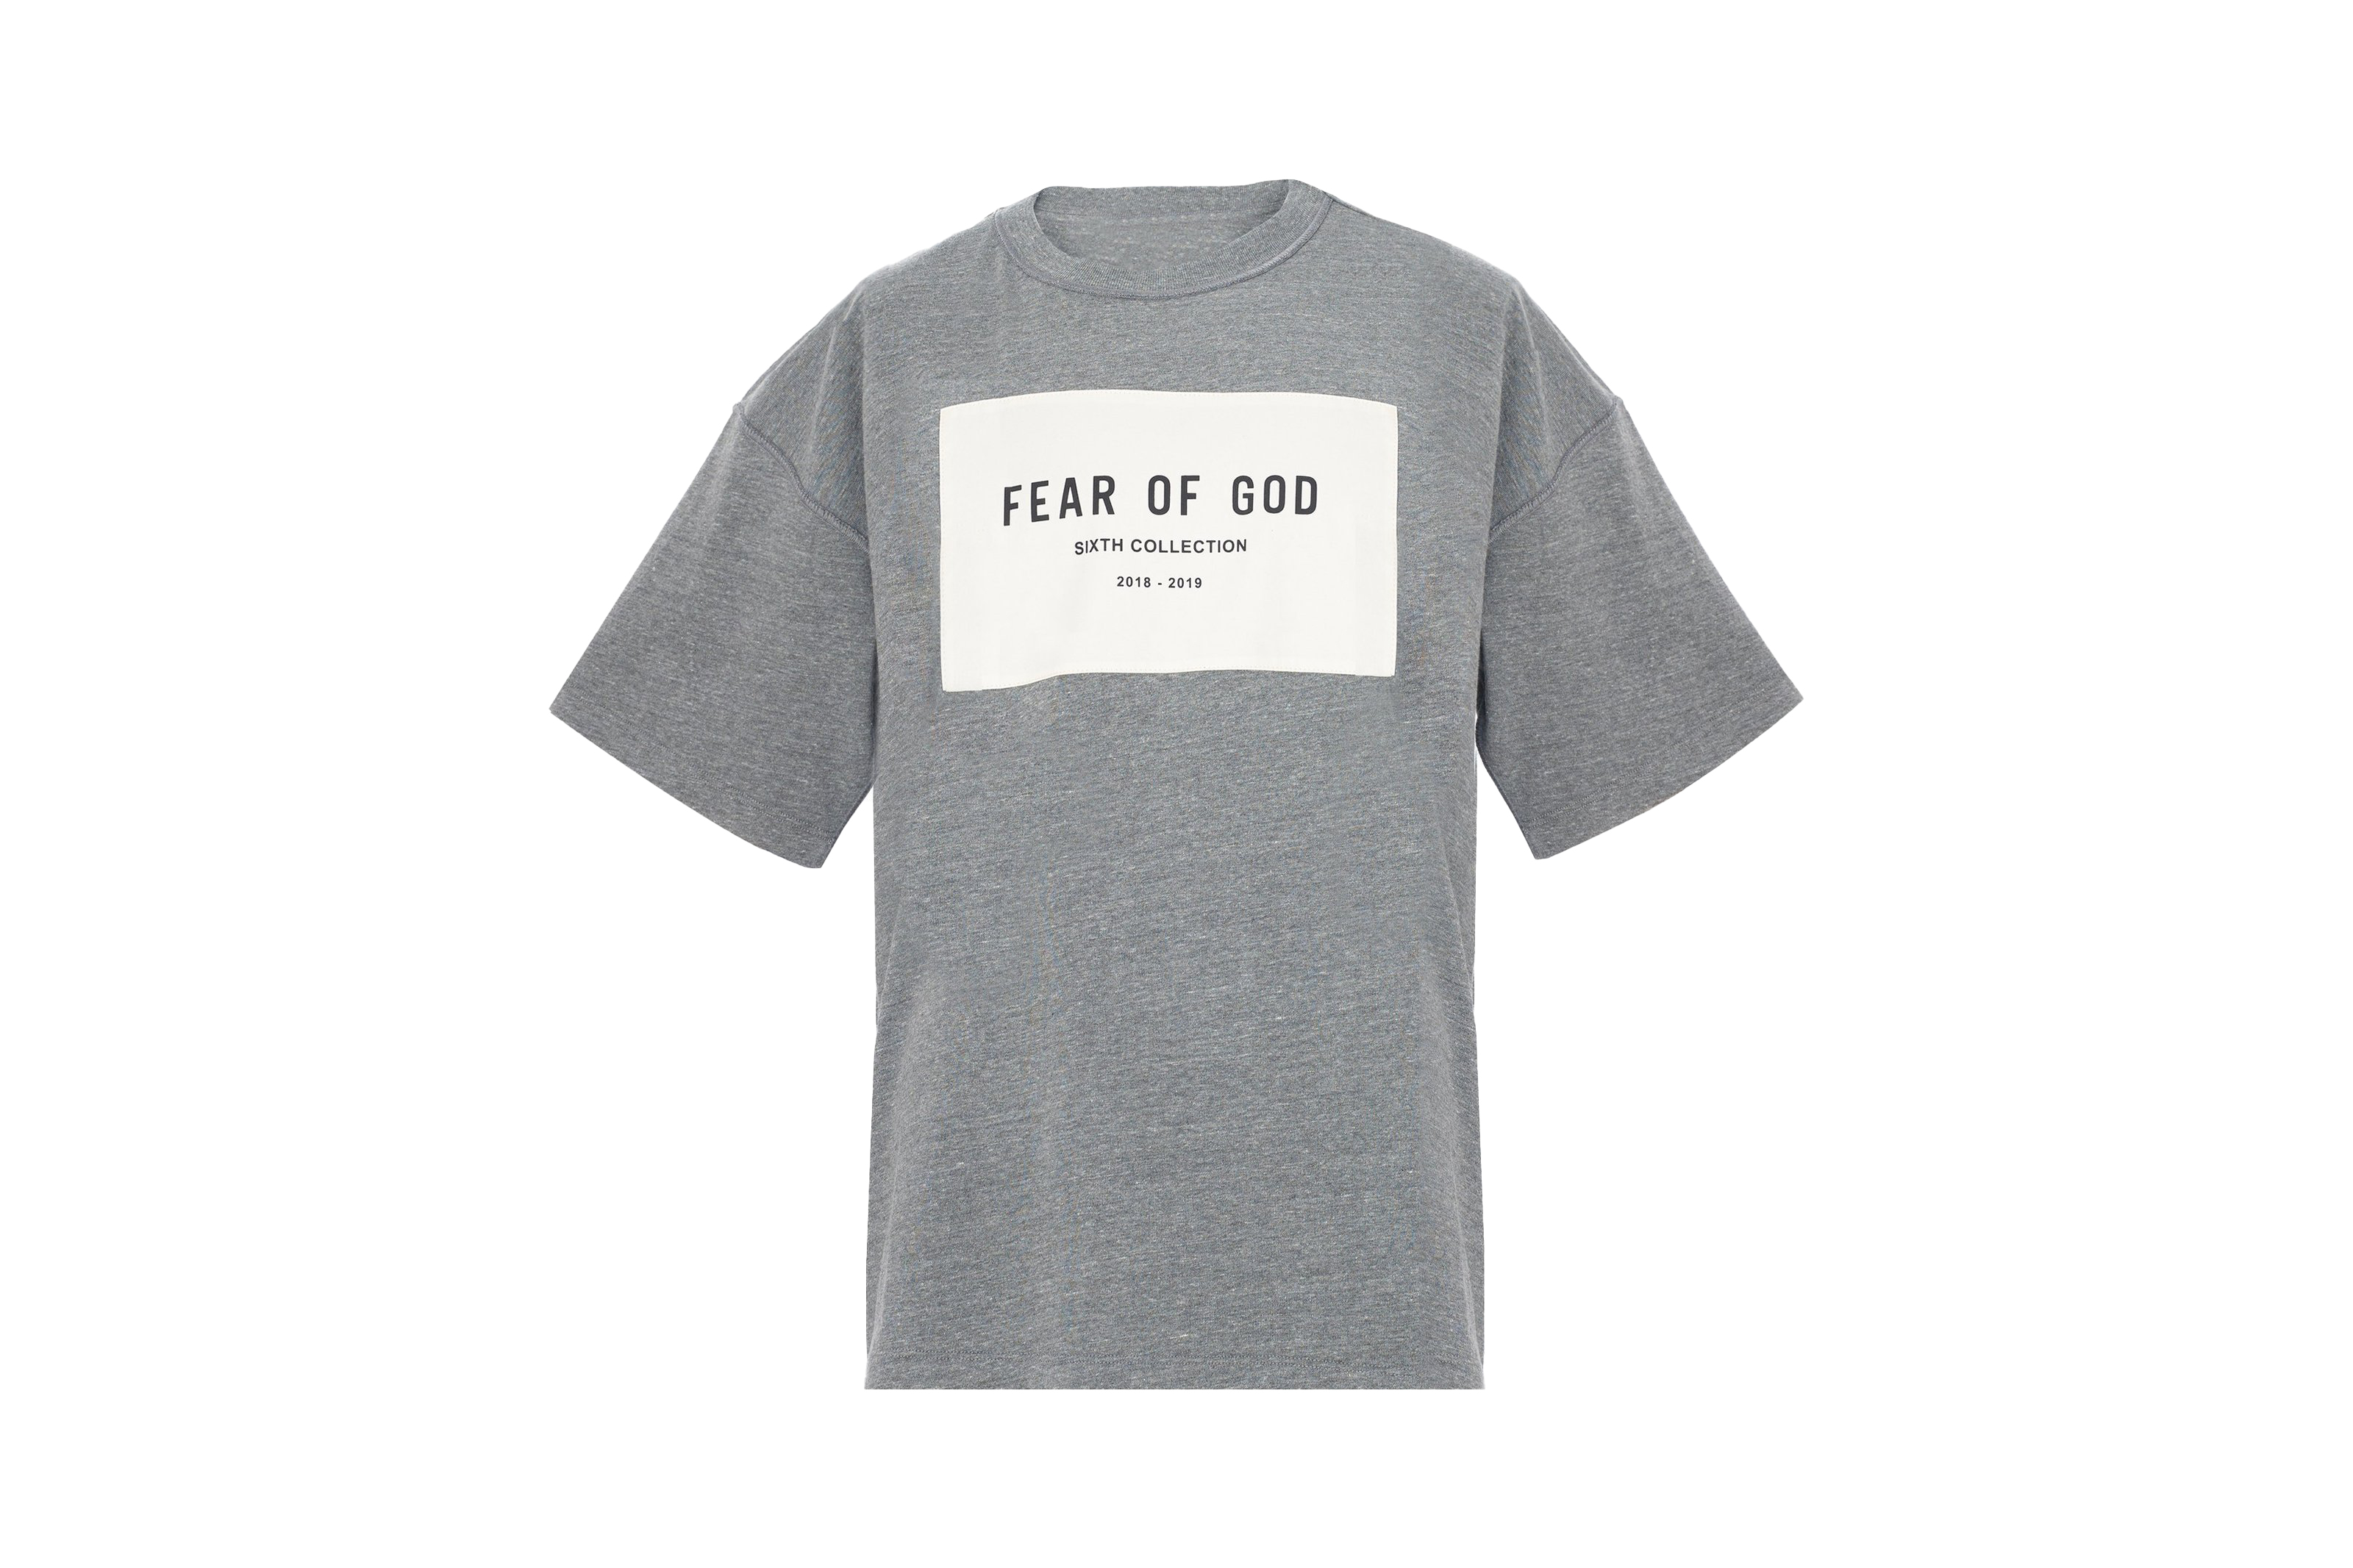 FEAR OF GOD 6th collection logo t shirt